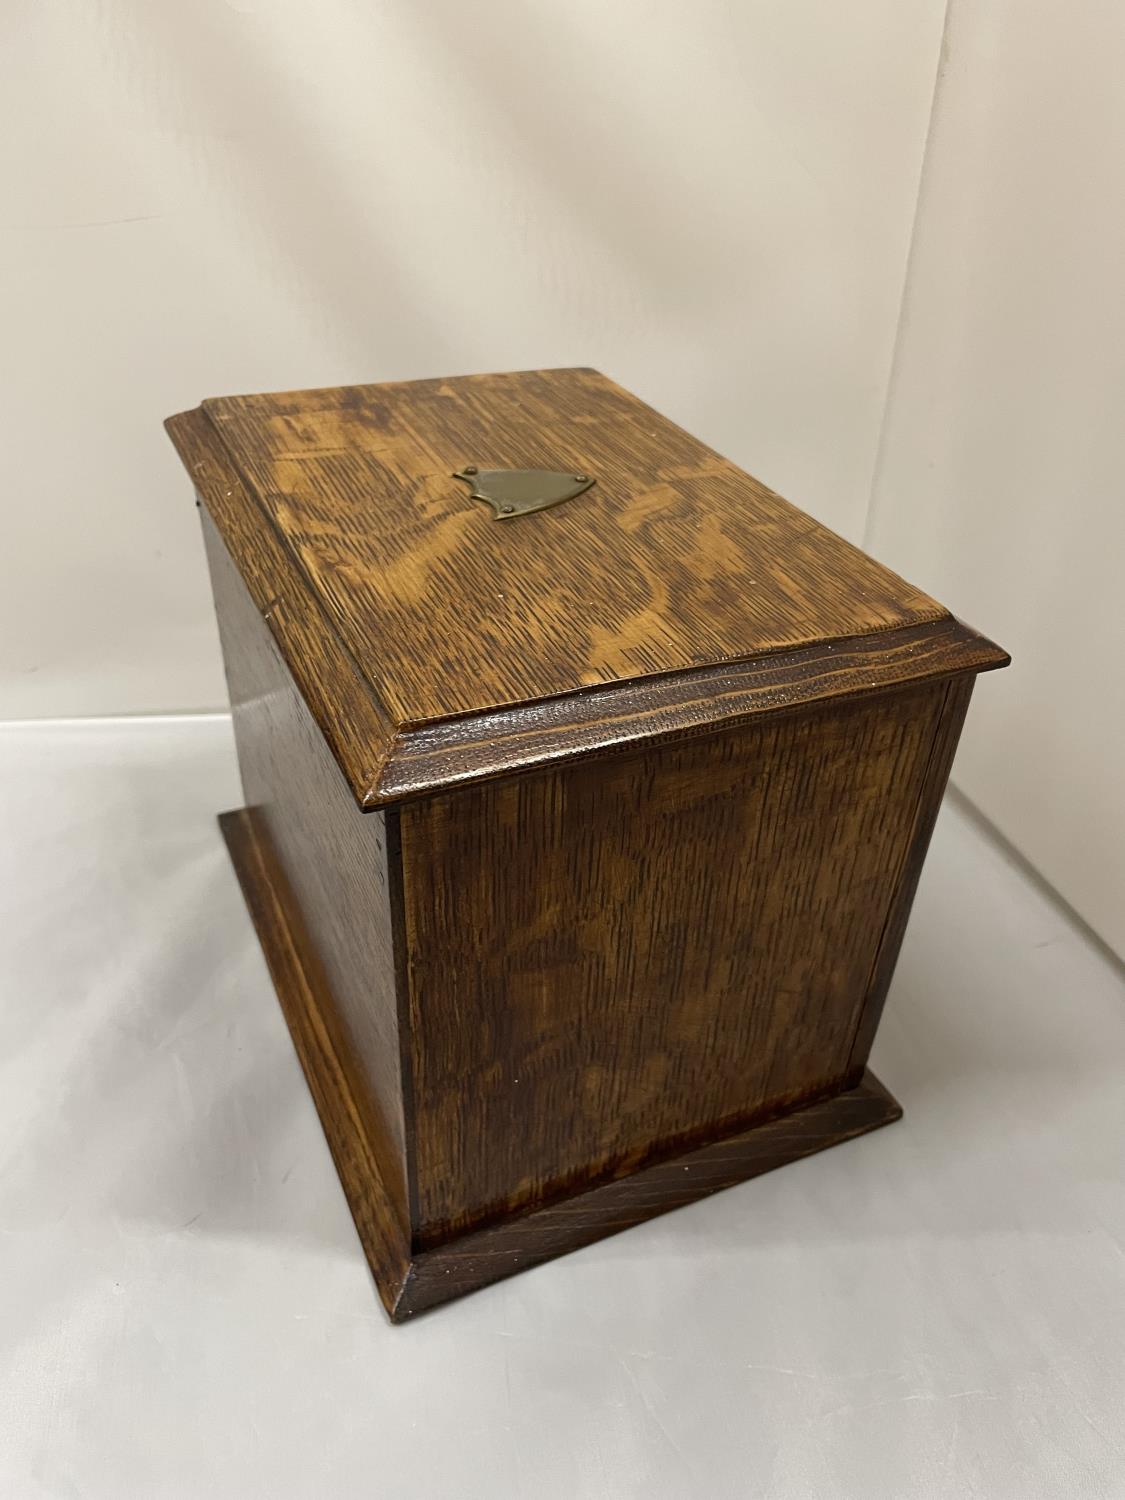 AN EARLY 20TH CENTURY OAK STATIONARY BOX WHICH OPENS TO A LEATHER WRITING DESK, SHIELD ON THE LID. - Image 6 of 6